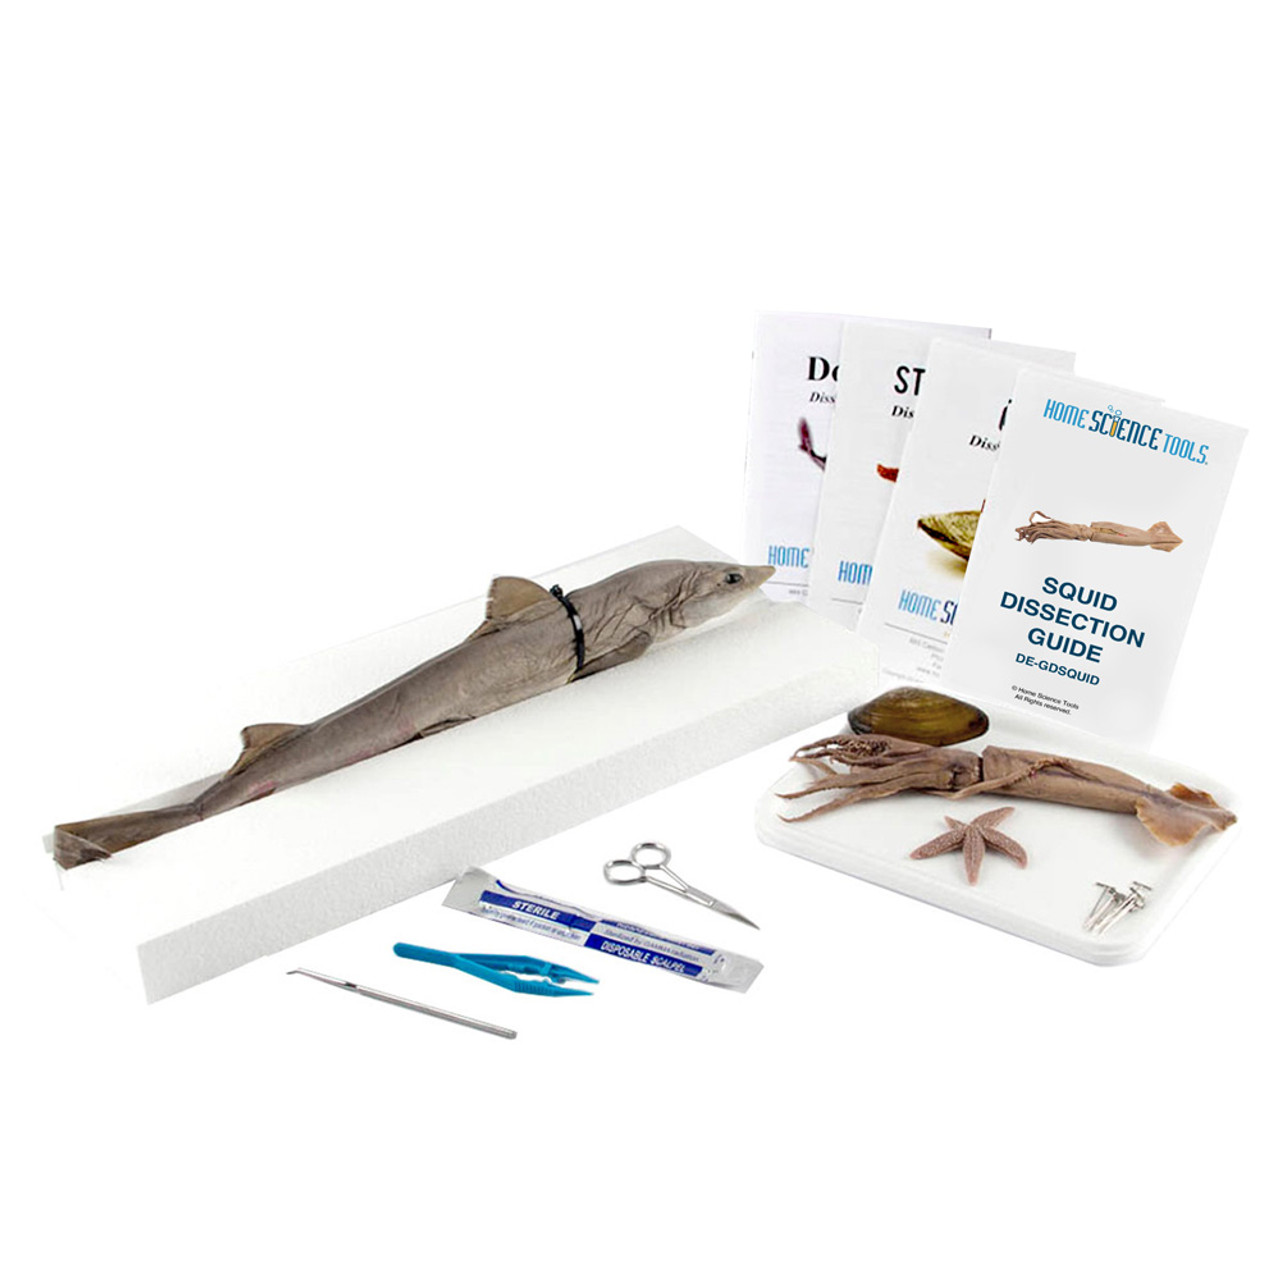 Marine Biology Dissection Kit | Home Science Tools